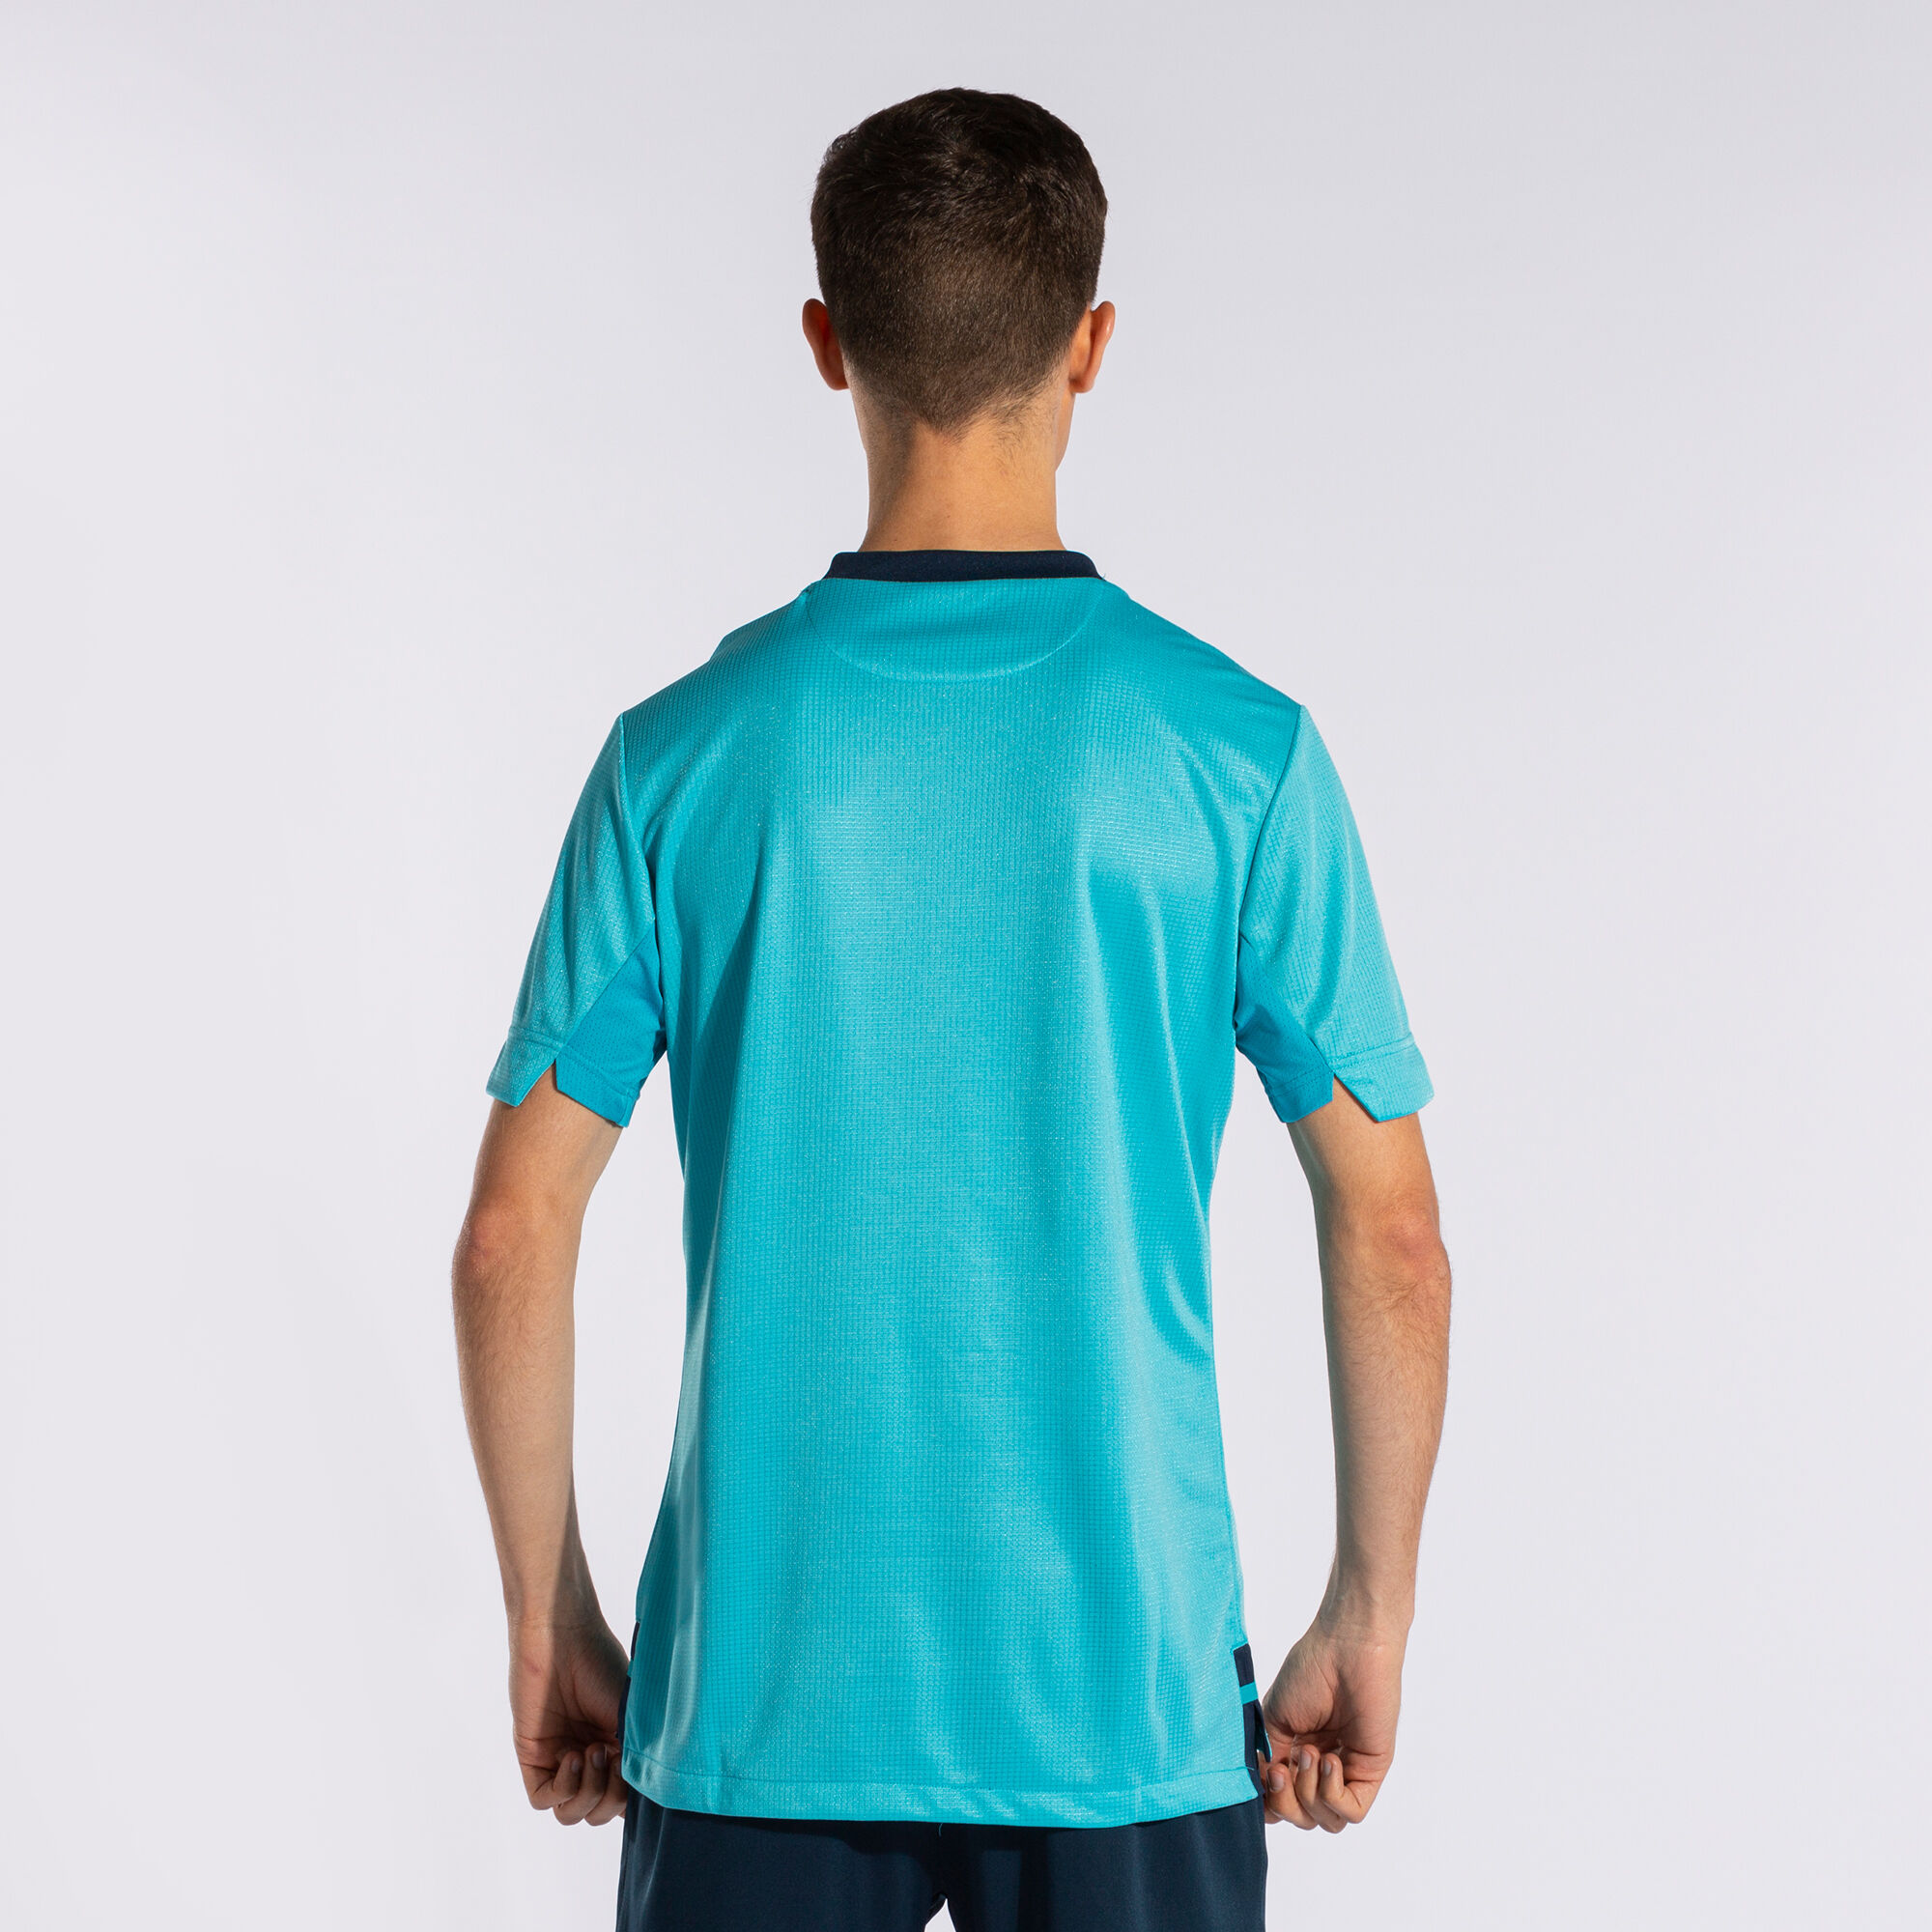 MAILLOT MANCHES COURTES HOMME GOLD IV TURQUOISE FLUO BLEU MARINE